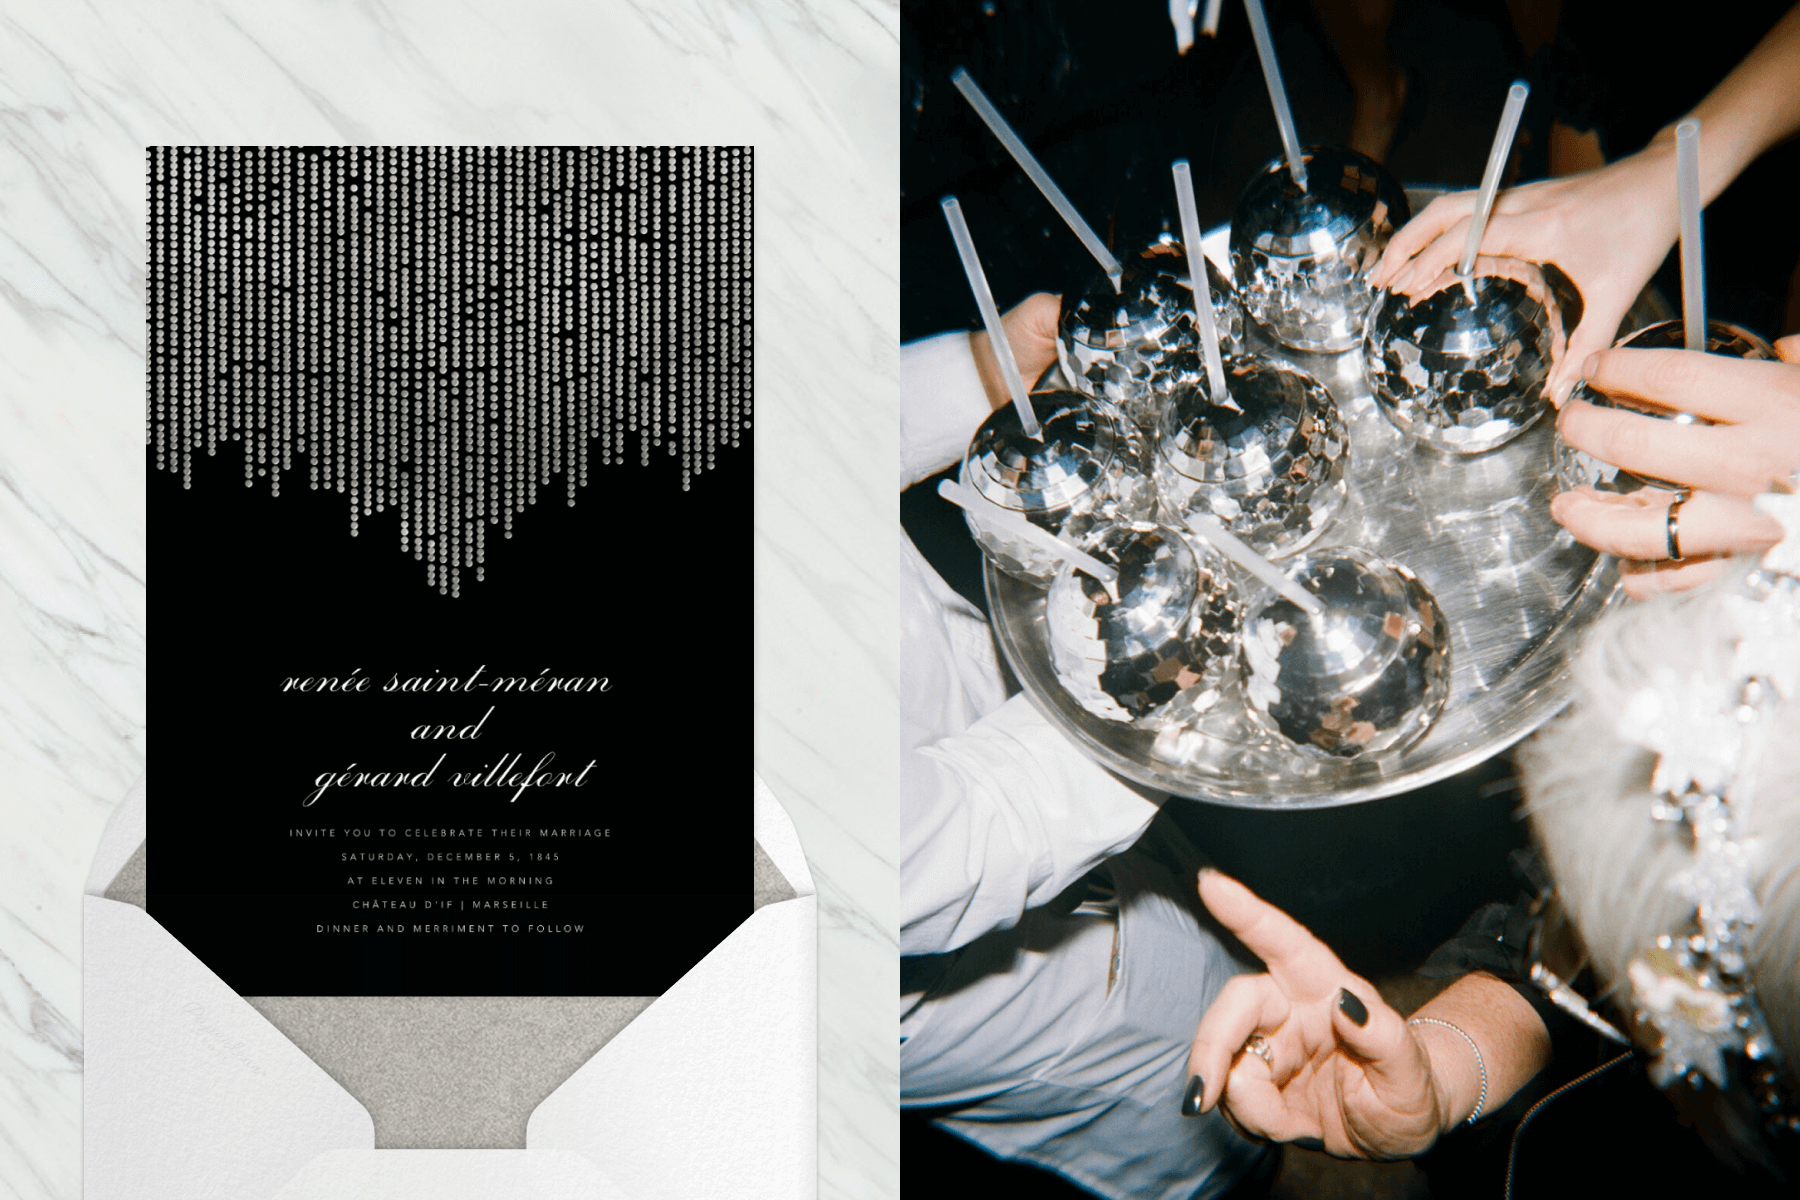 left: A black invitation with silver beaded strings hanging from the top on a marble backdrop. Right: Hands reach for disco ball-shaped drinks with straws on a silver serving platter.